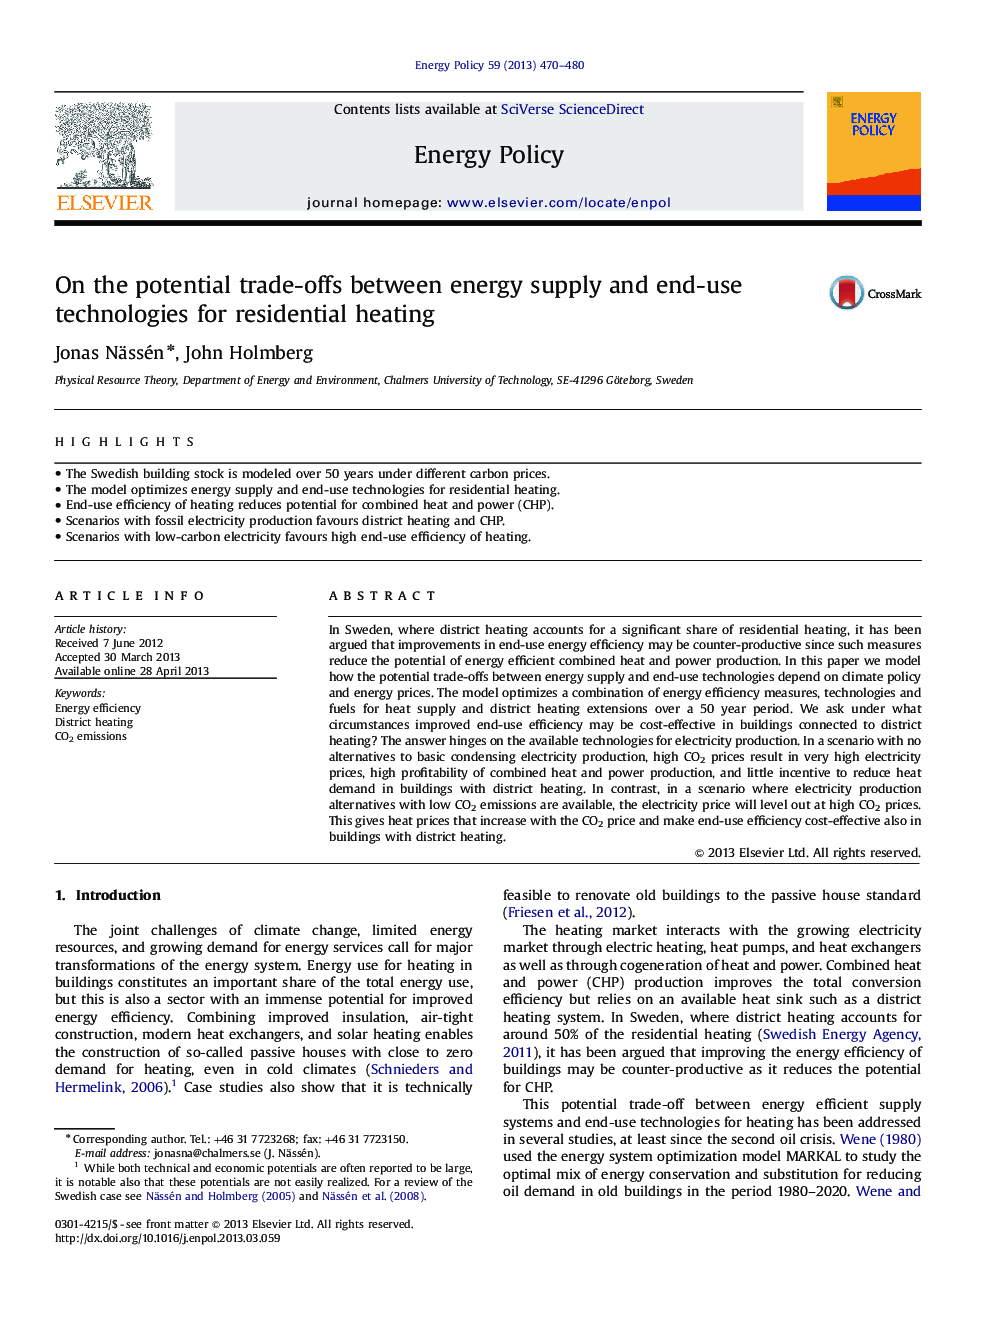 On the potential trade-offs between energy supply and end-use technologies for residential heating